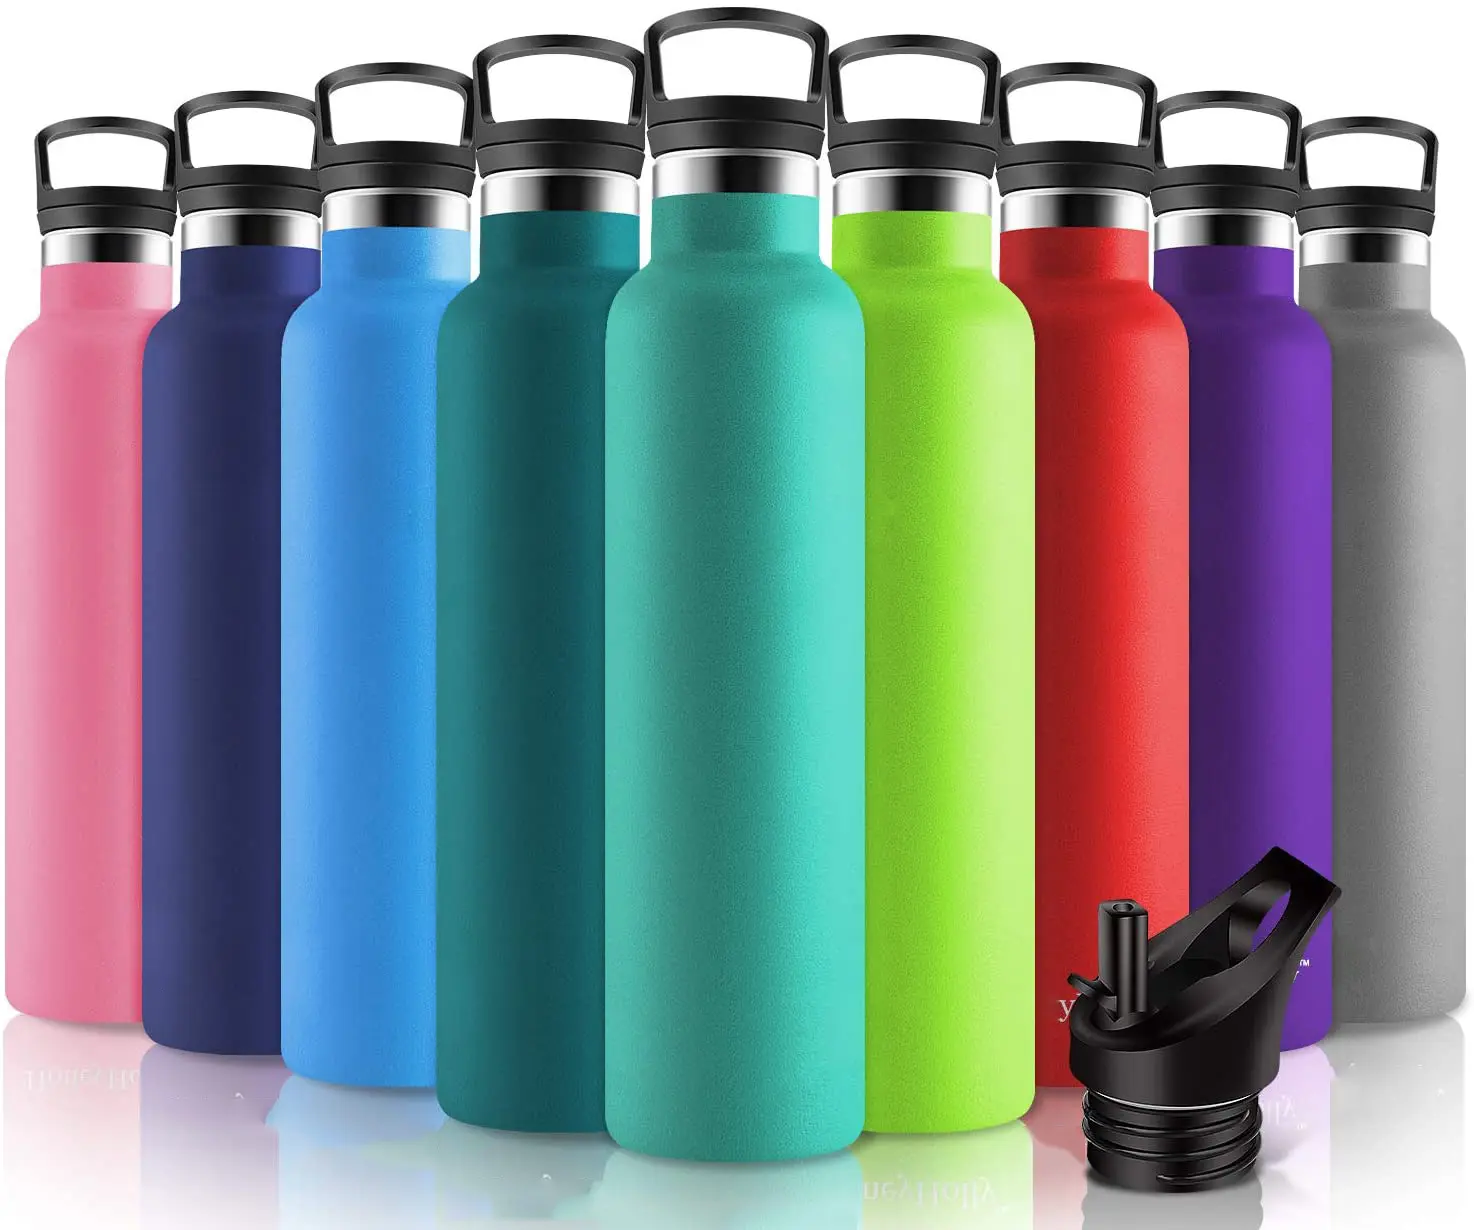 Vacuum Insulated Stainless Steel Water Bottle Reusable Sport Bottles 1000ml for Hot/Cold Vacuum Flask For Kids HoneyHolly